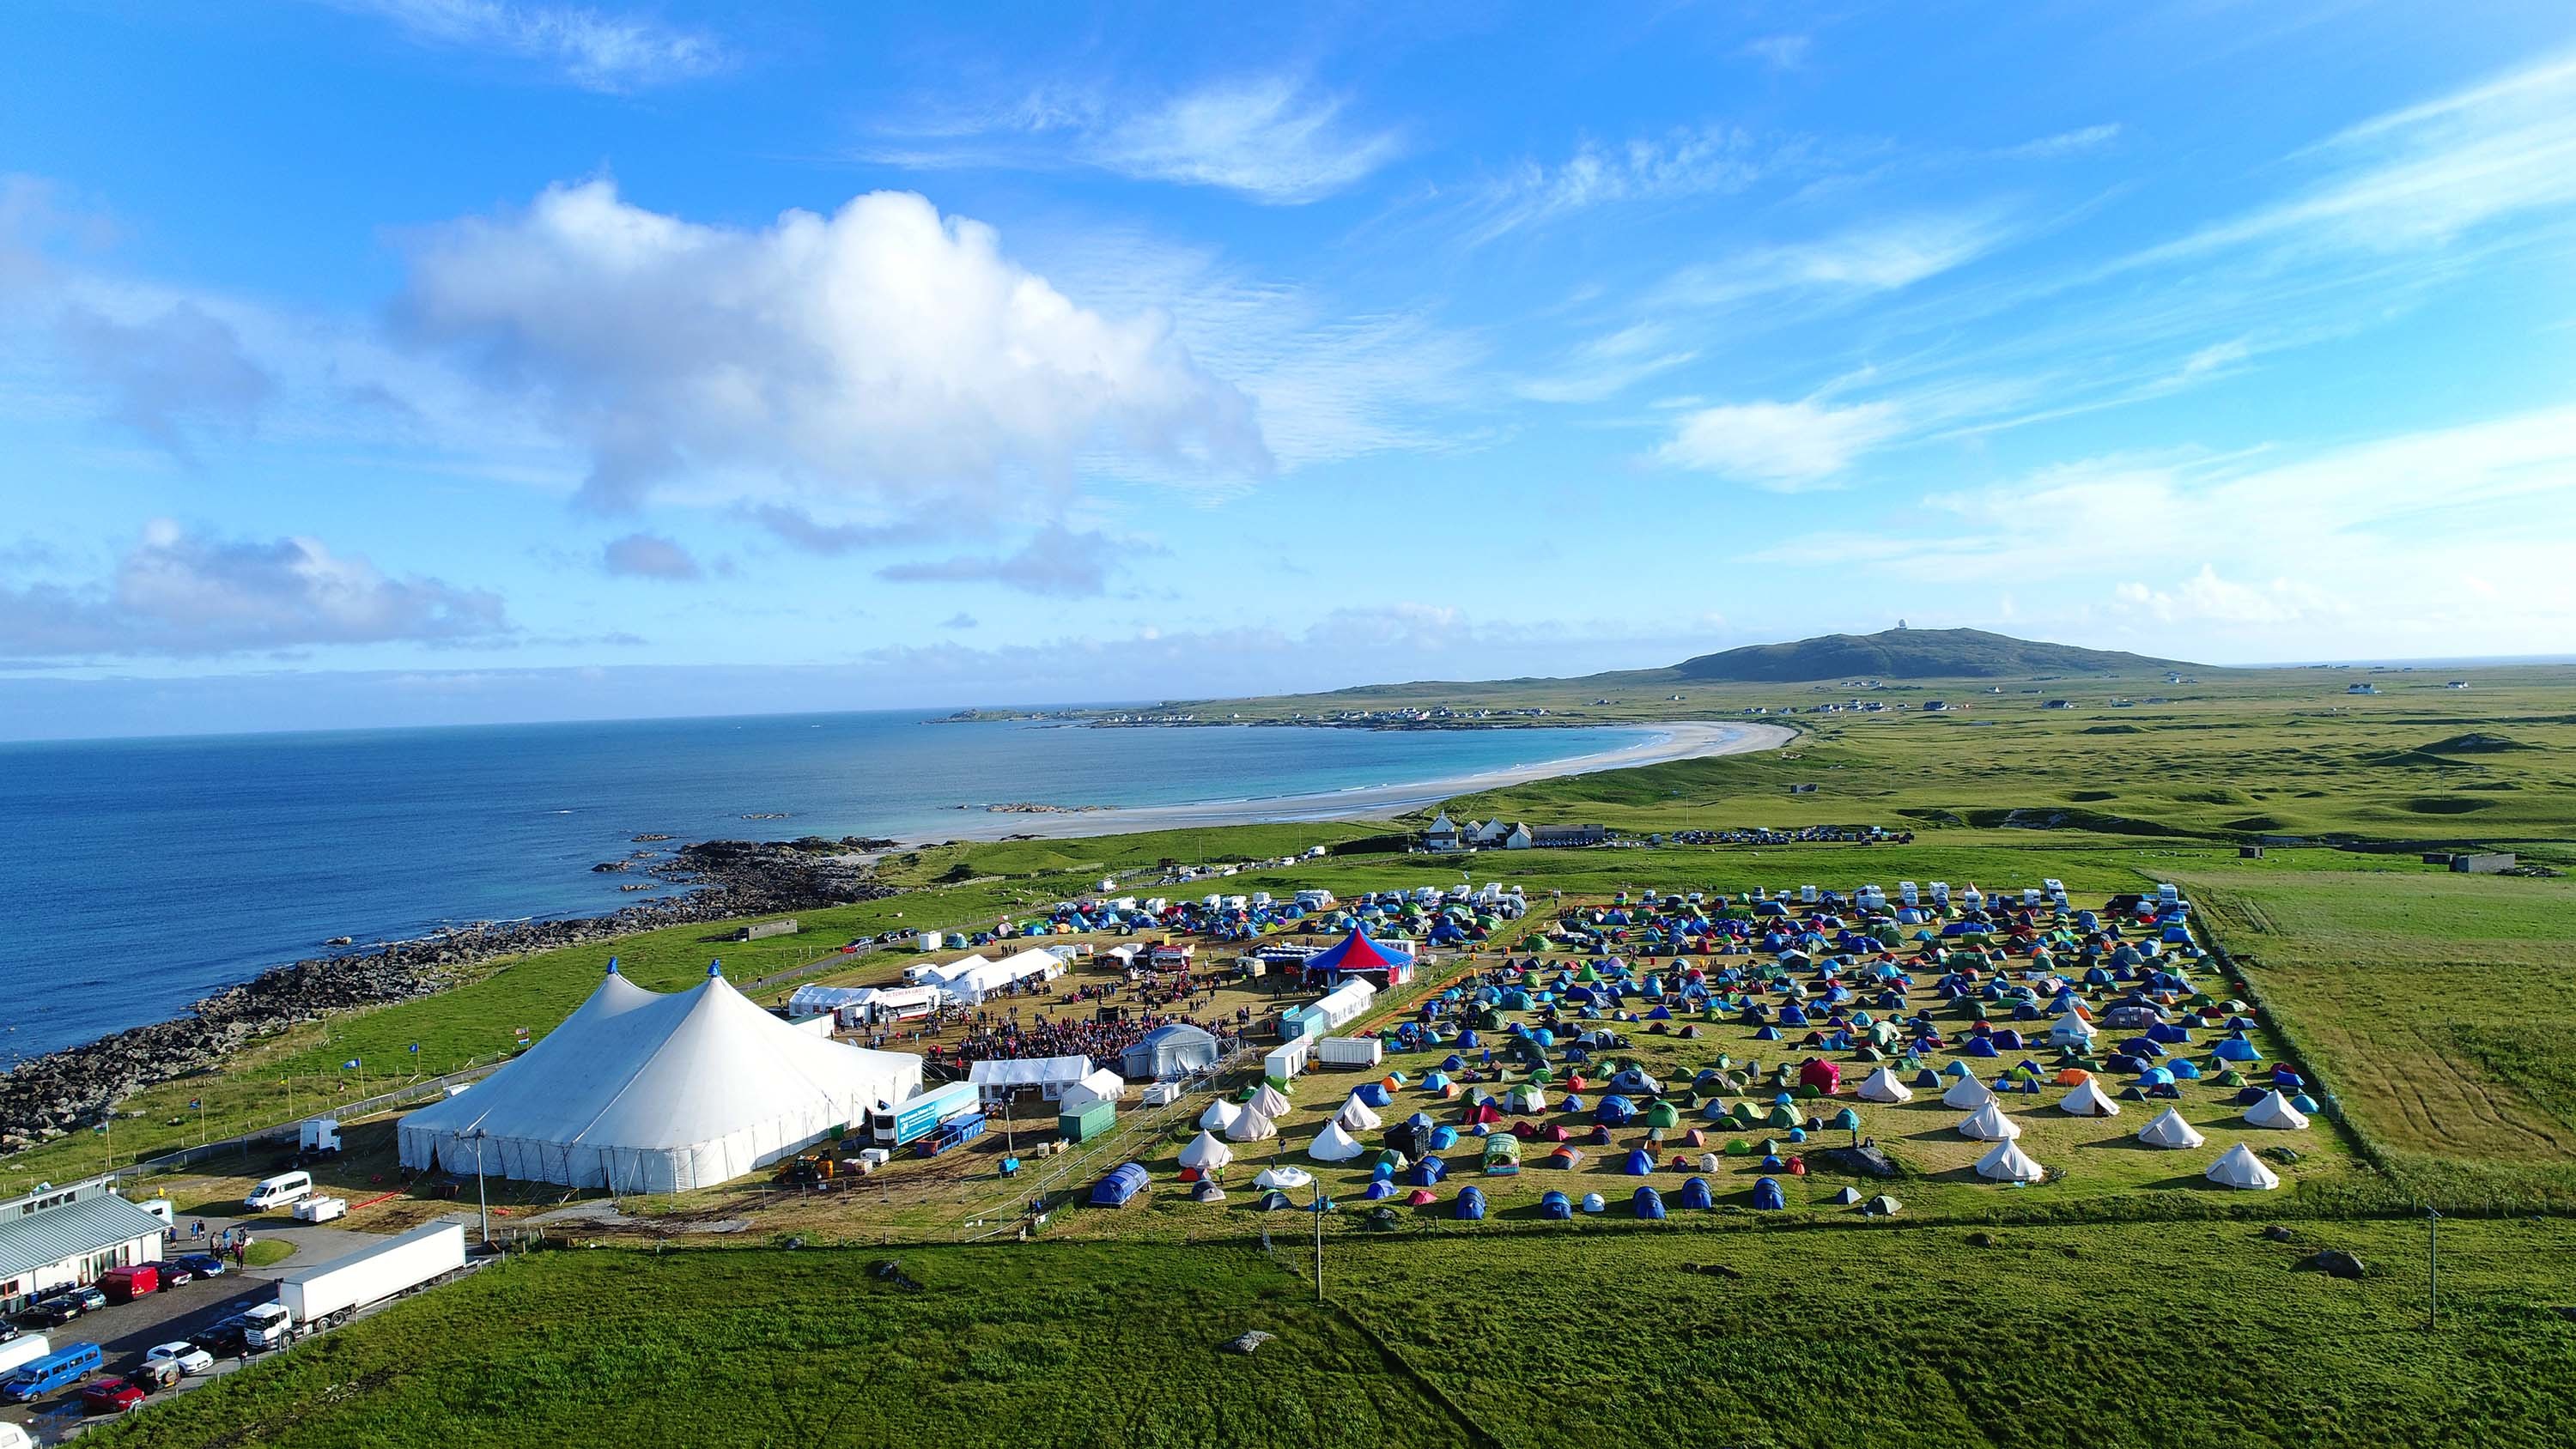 Tiree Music Festival gets off to sunny start